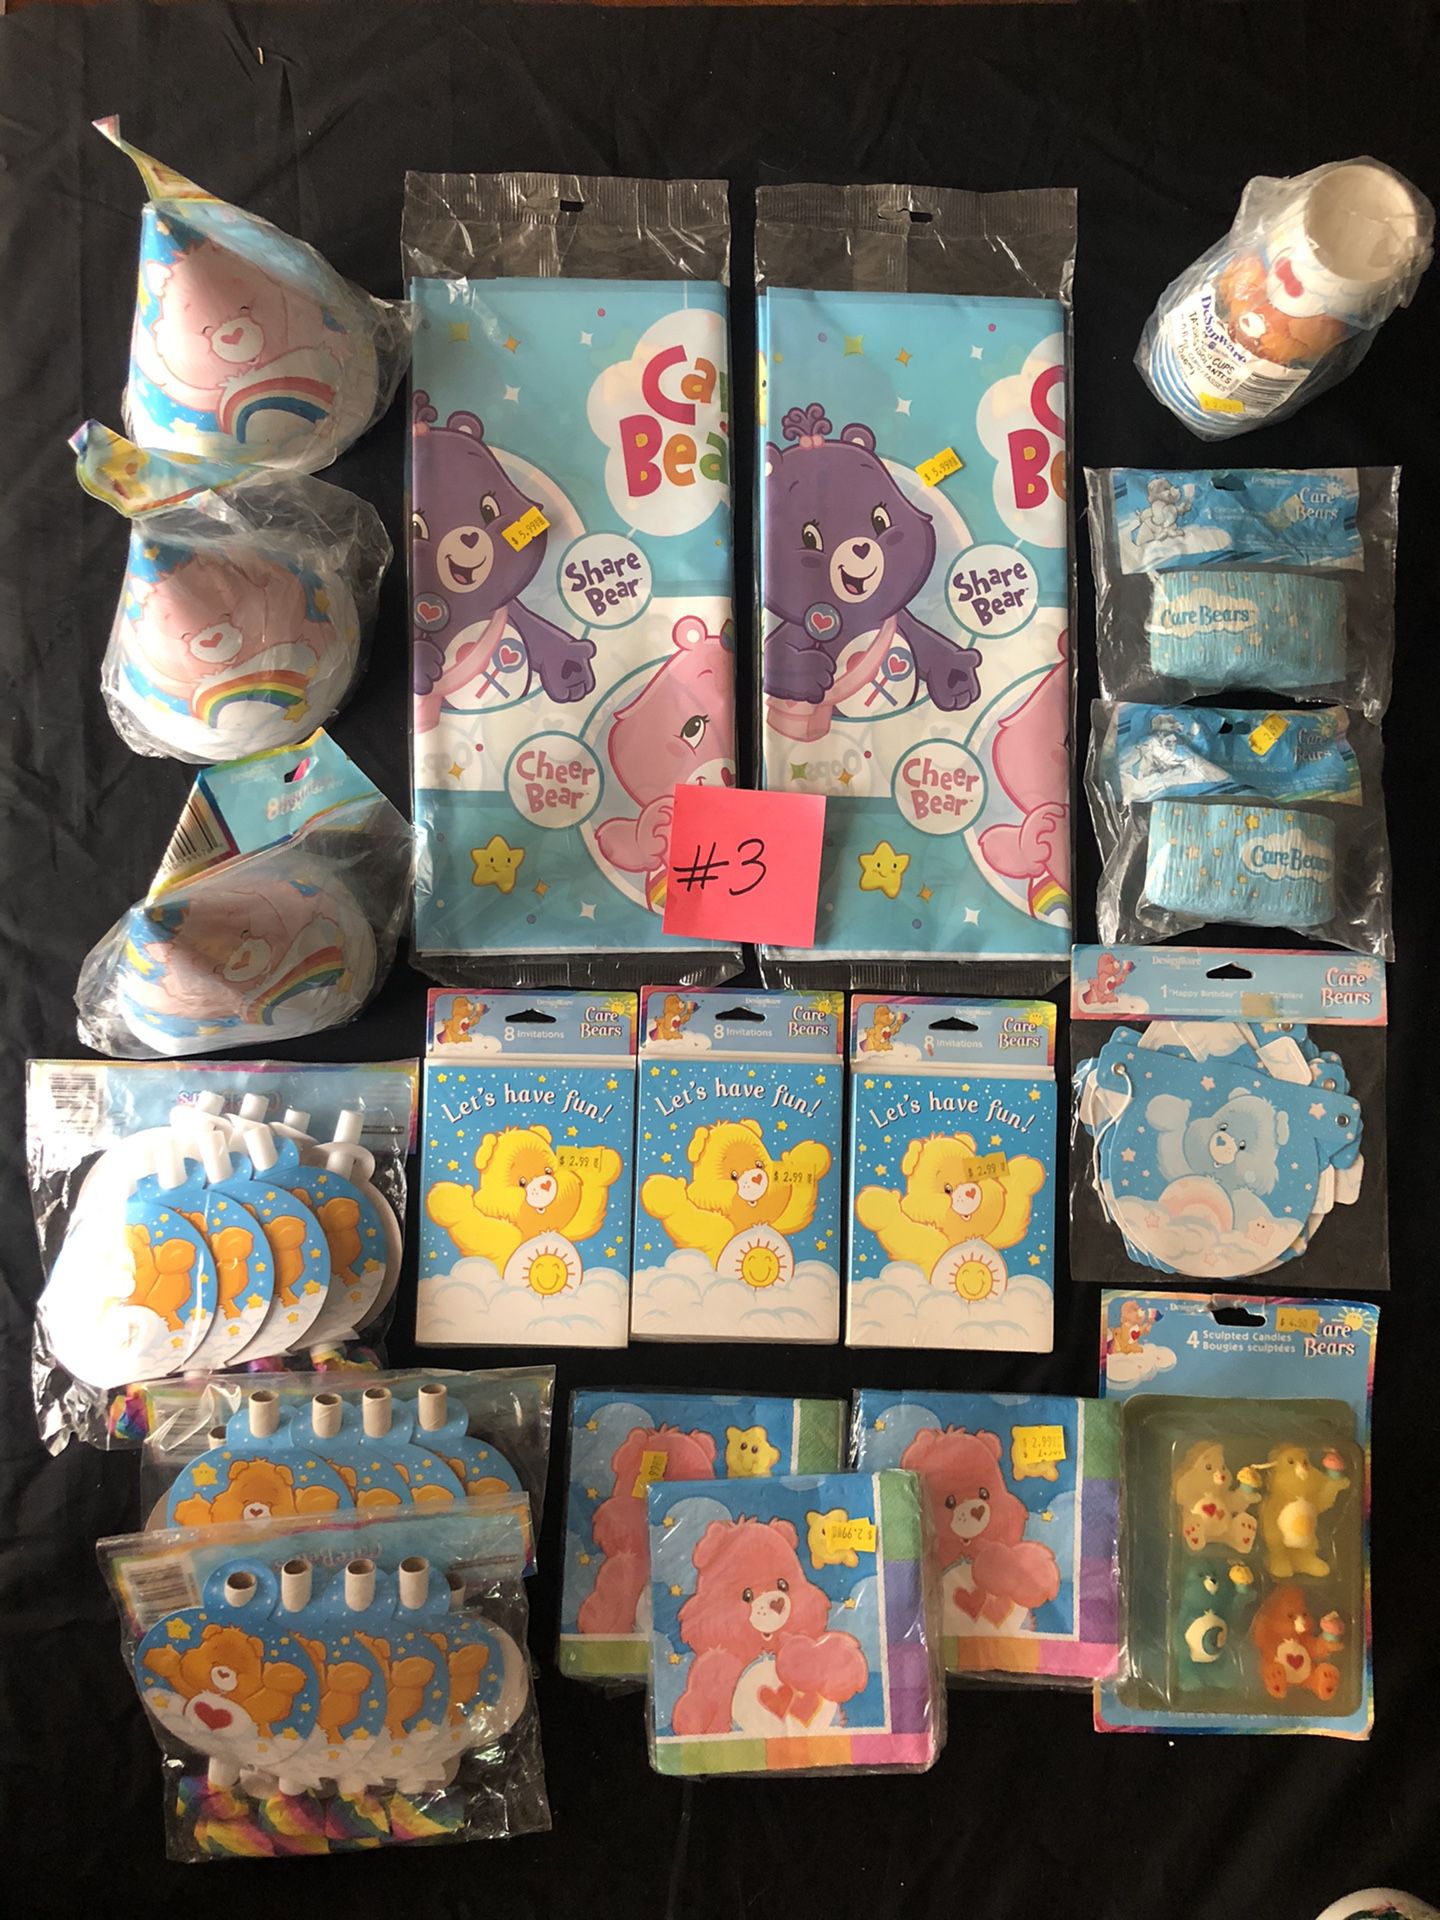 Care Bears party supplies 19packs